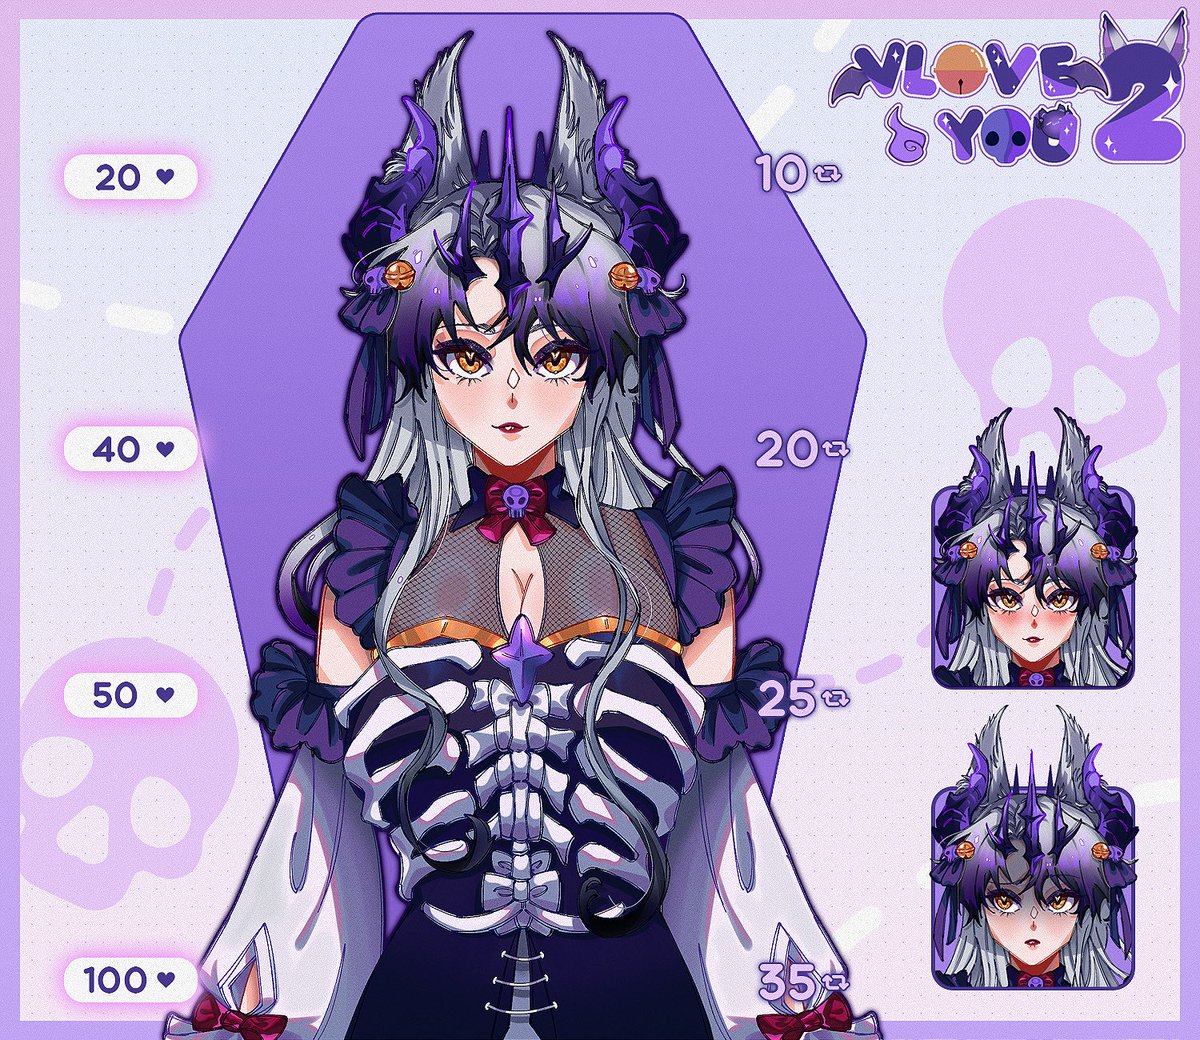 💀 ┆ full model reveal ! ₊˚⊹ ᰔ

✦ . 　⁺ 　 . ✦ . 　⁺ 　 . ✦

💜 tadaaaa! you’ve done it, my sinners! you’ve unlocked my entire model! thank you sosososo much for the love, cuties! i just can’t wait to meet you all~ 

꒰🔮꒱ #visualnovel #vly2 #CSvnjam ✦